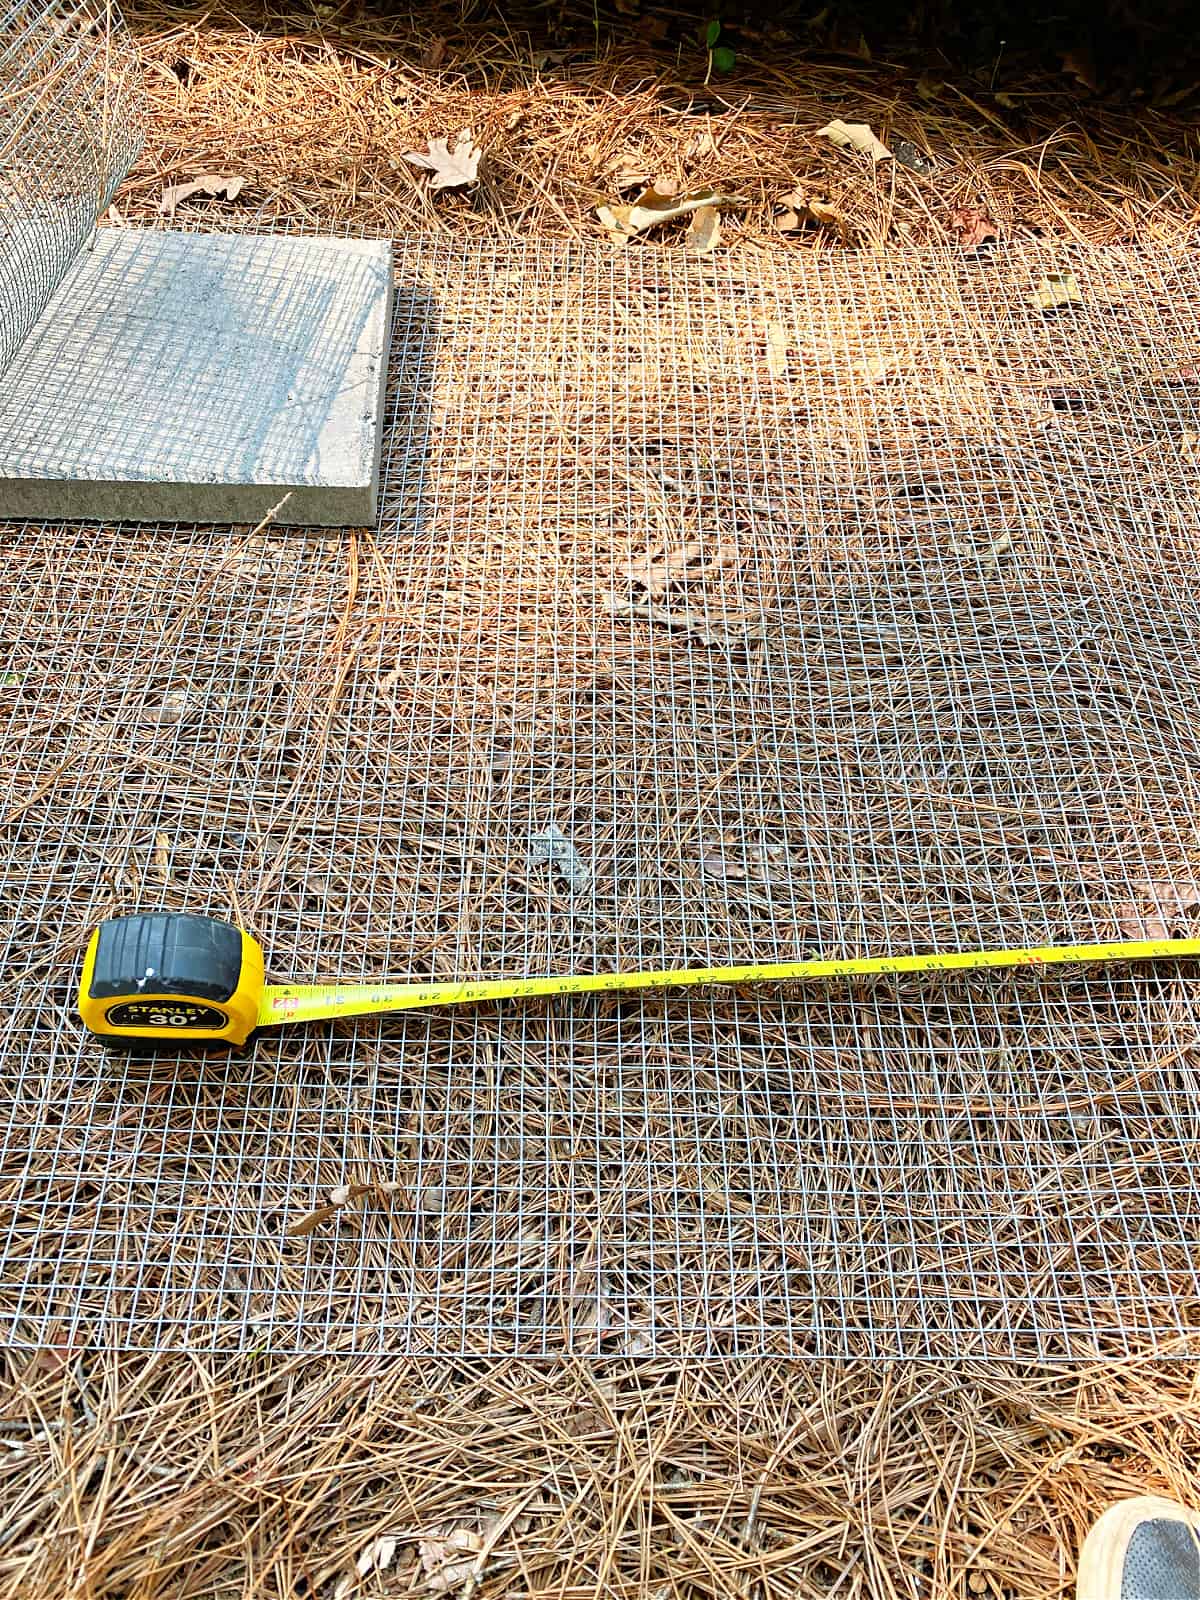 tape measure and chicken wire